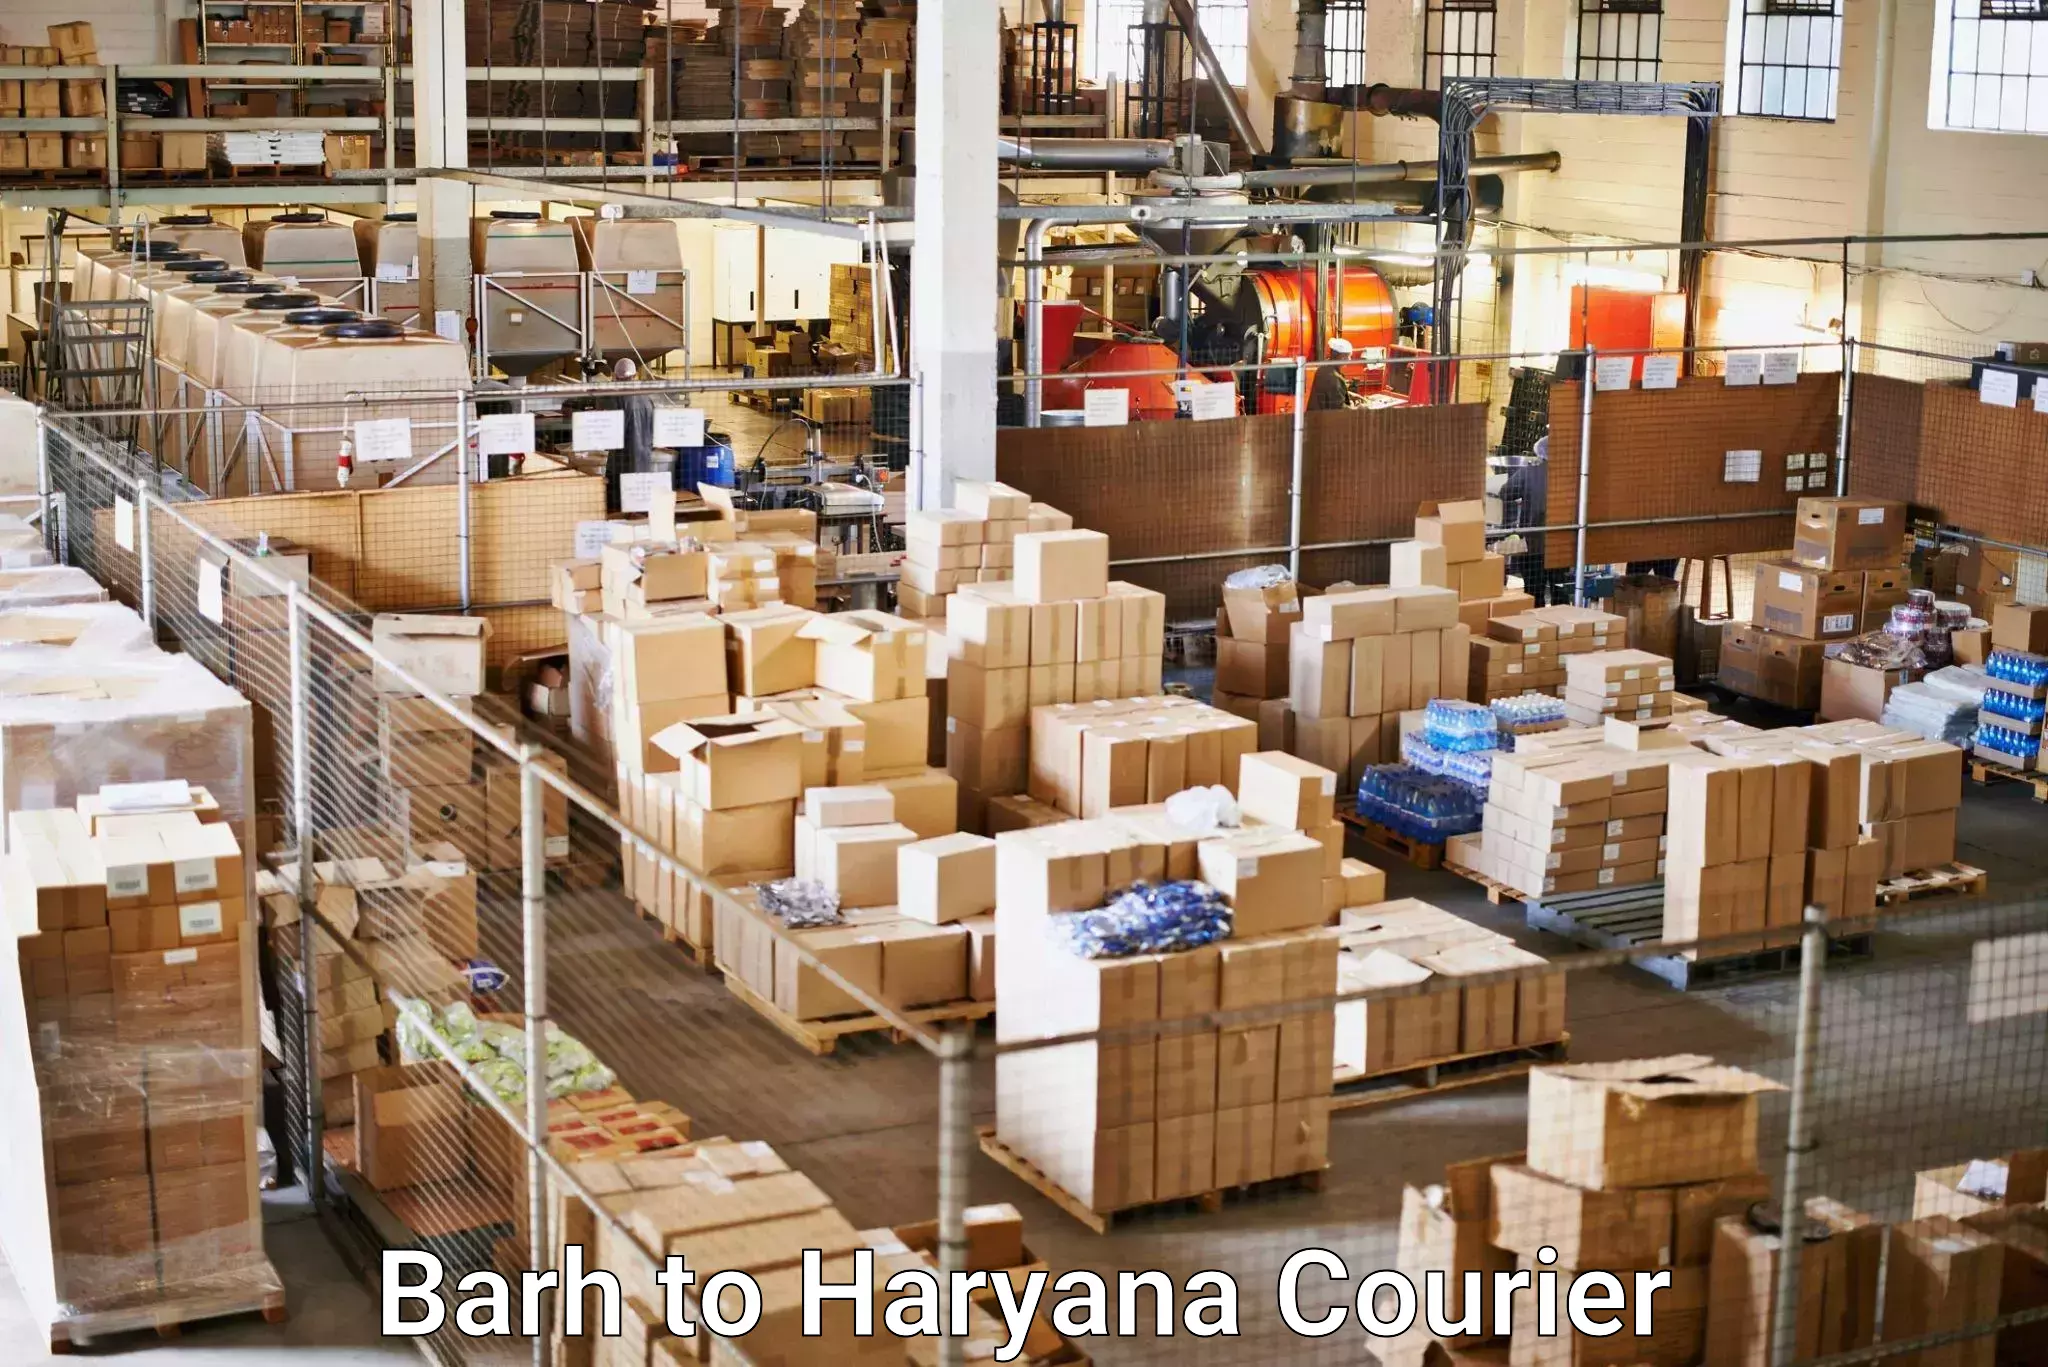 Business delivery service Barh to Haryana